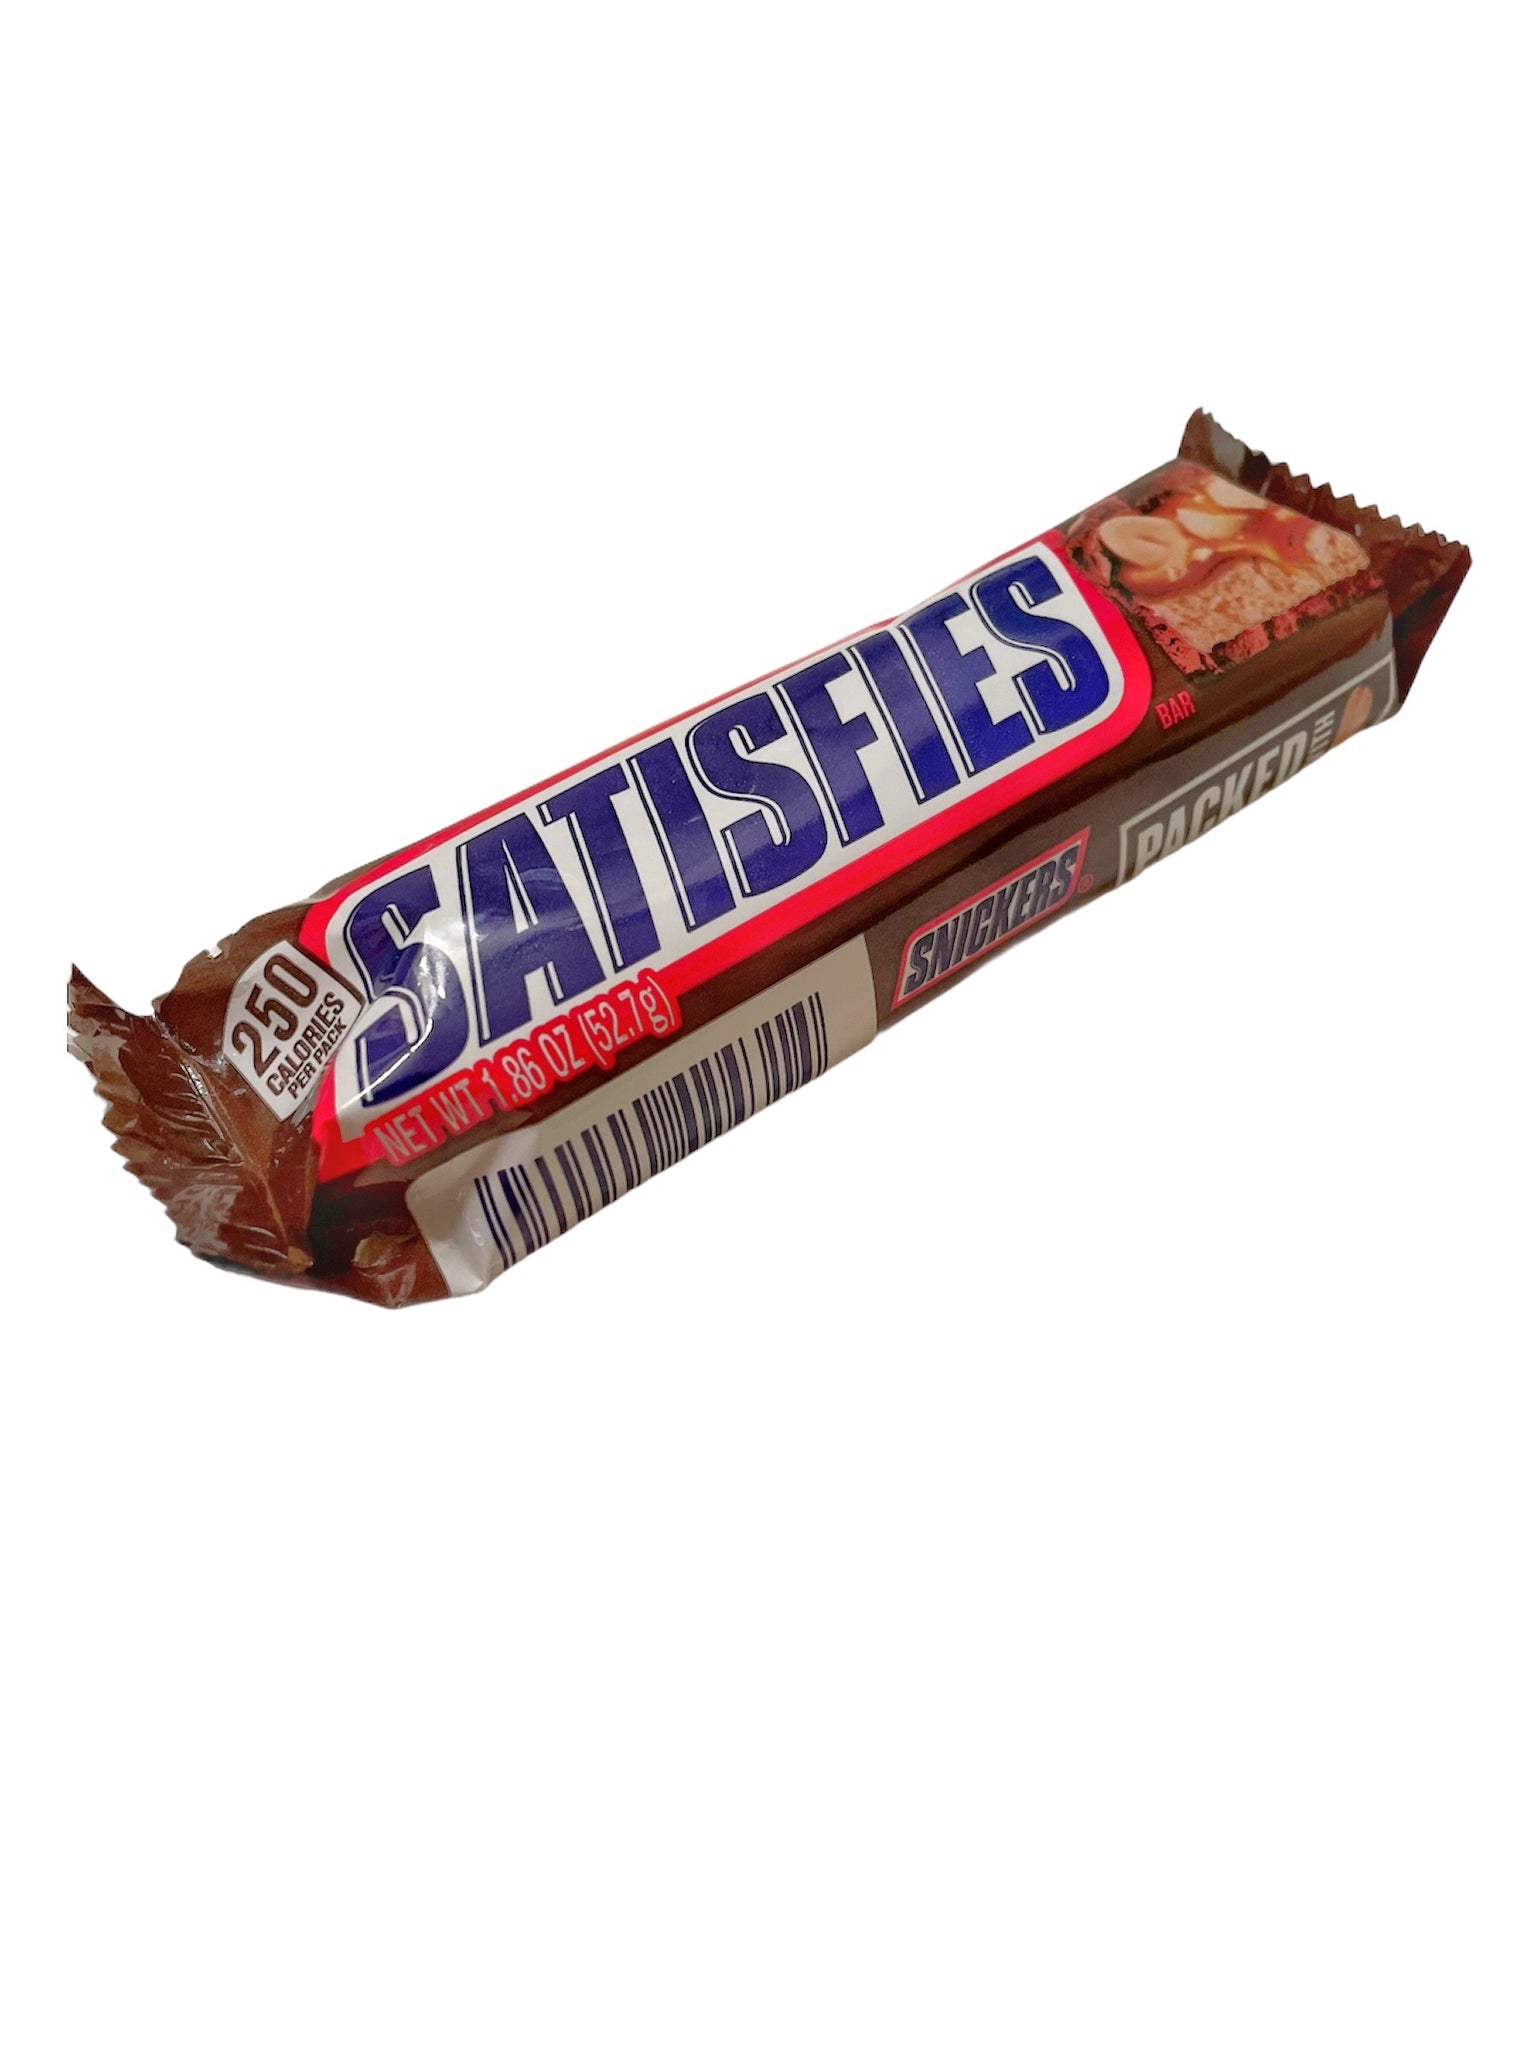 2021 Snickers Bar